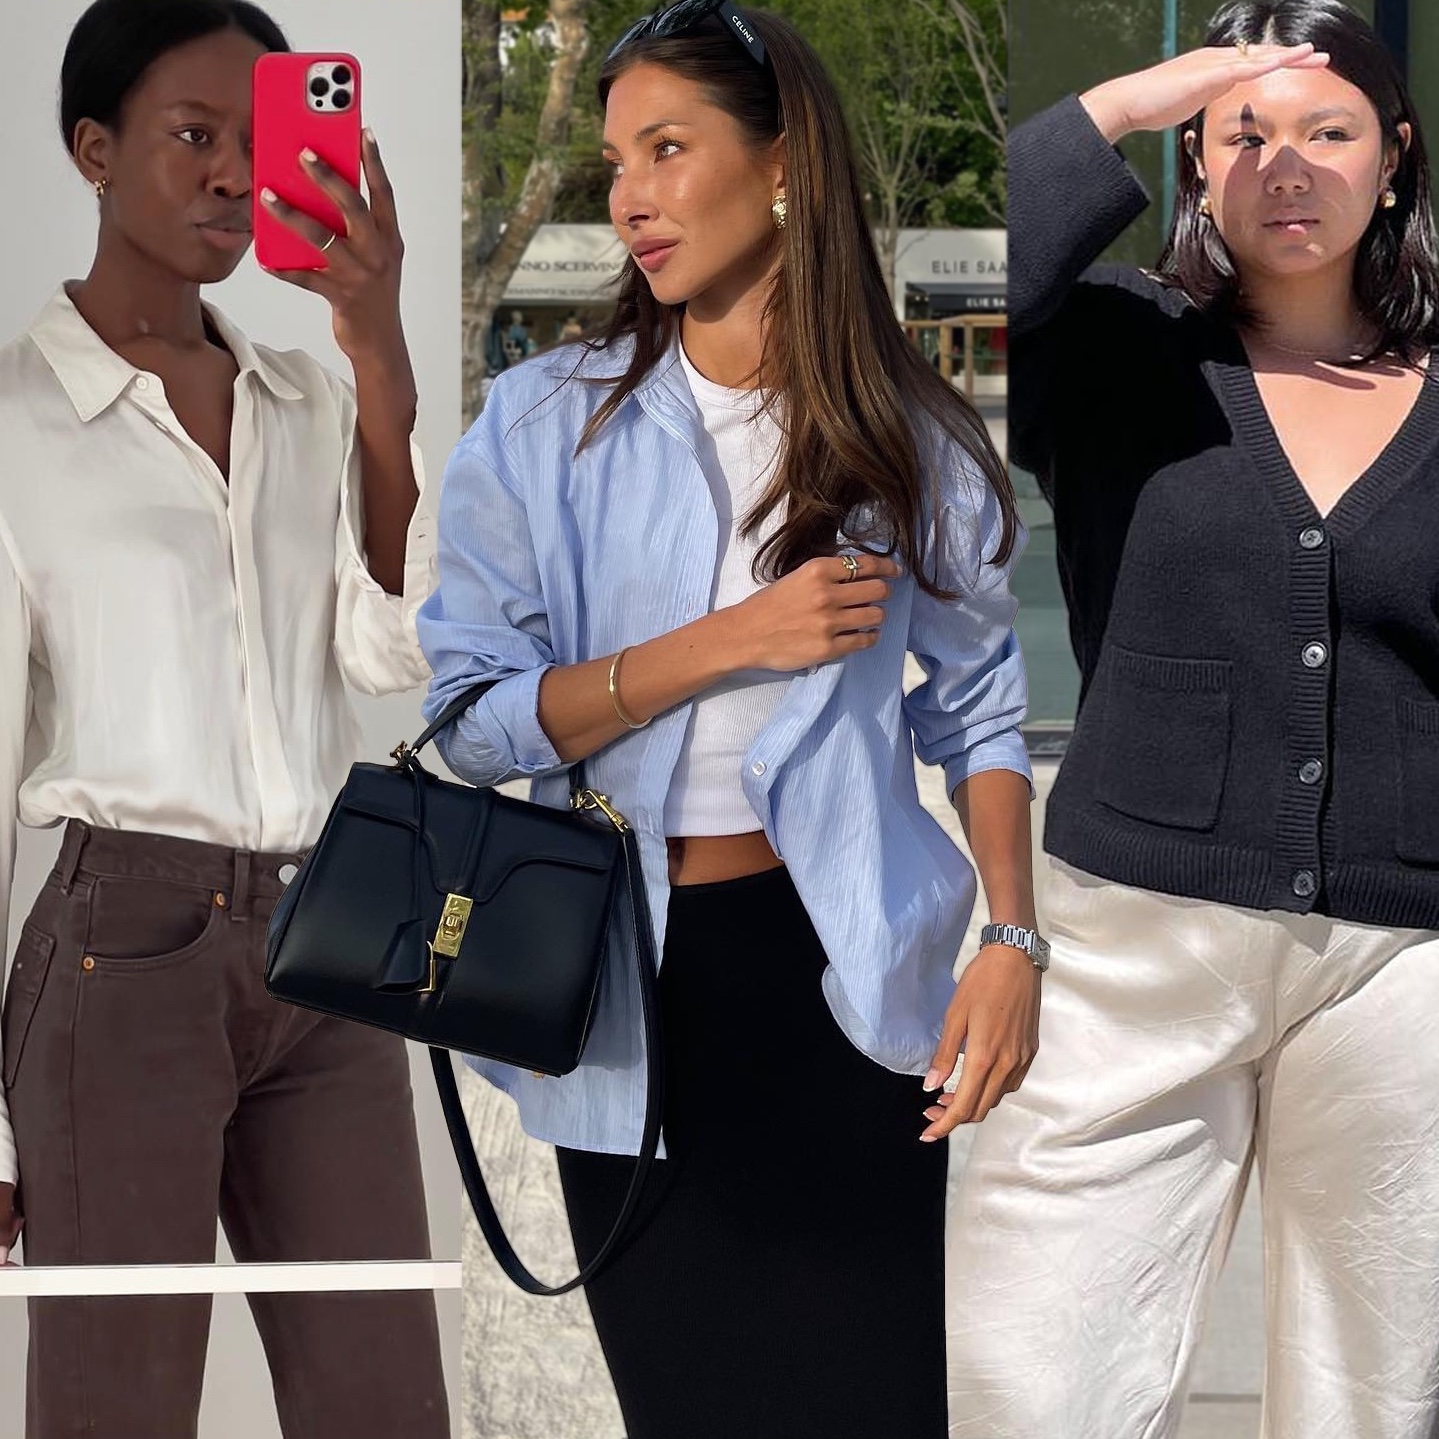 You Don't Need $$$ for Elegant Outfits—6 Affordable Pieces That Do the Trick